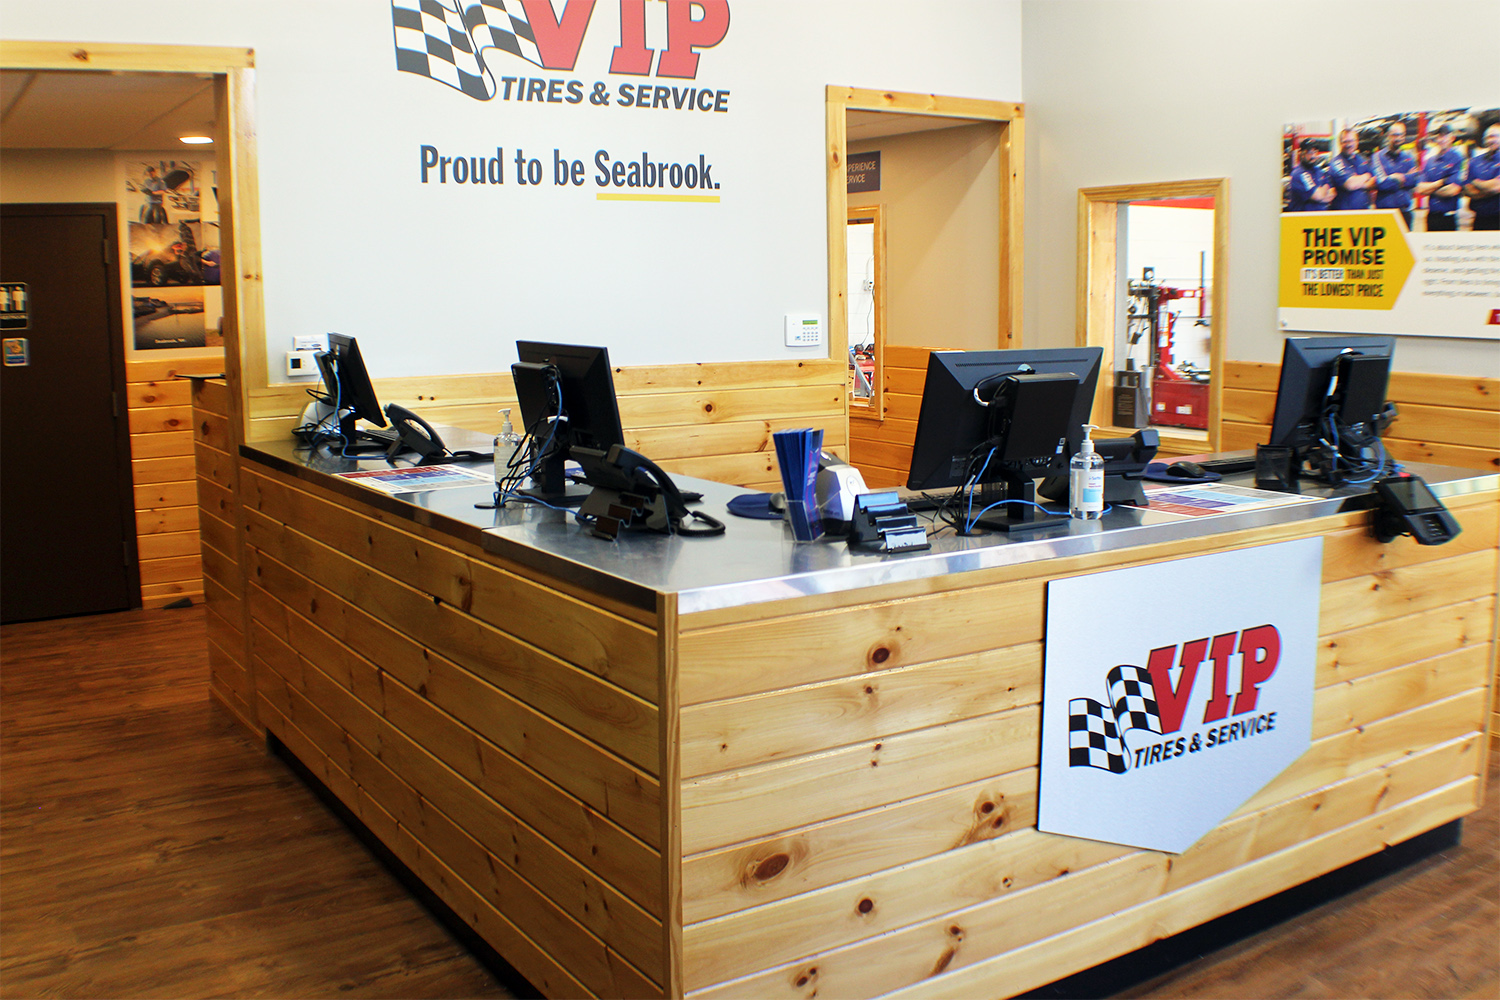 VIP Tires & Service 441 Lafayette Rd, Seabrook New Hampshire 03874